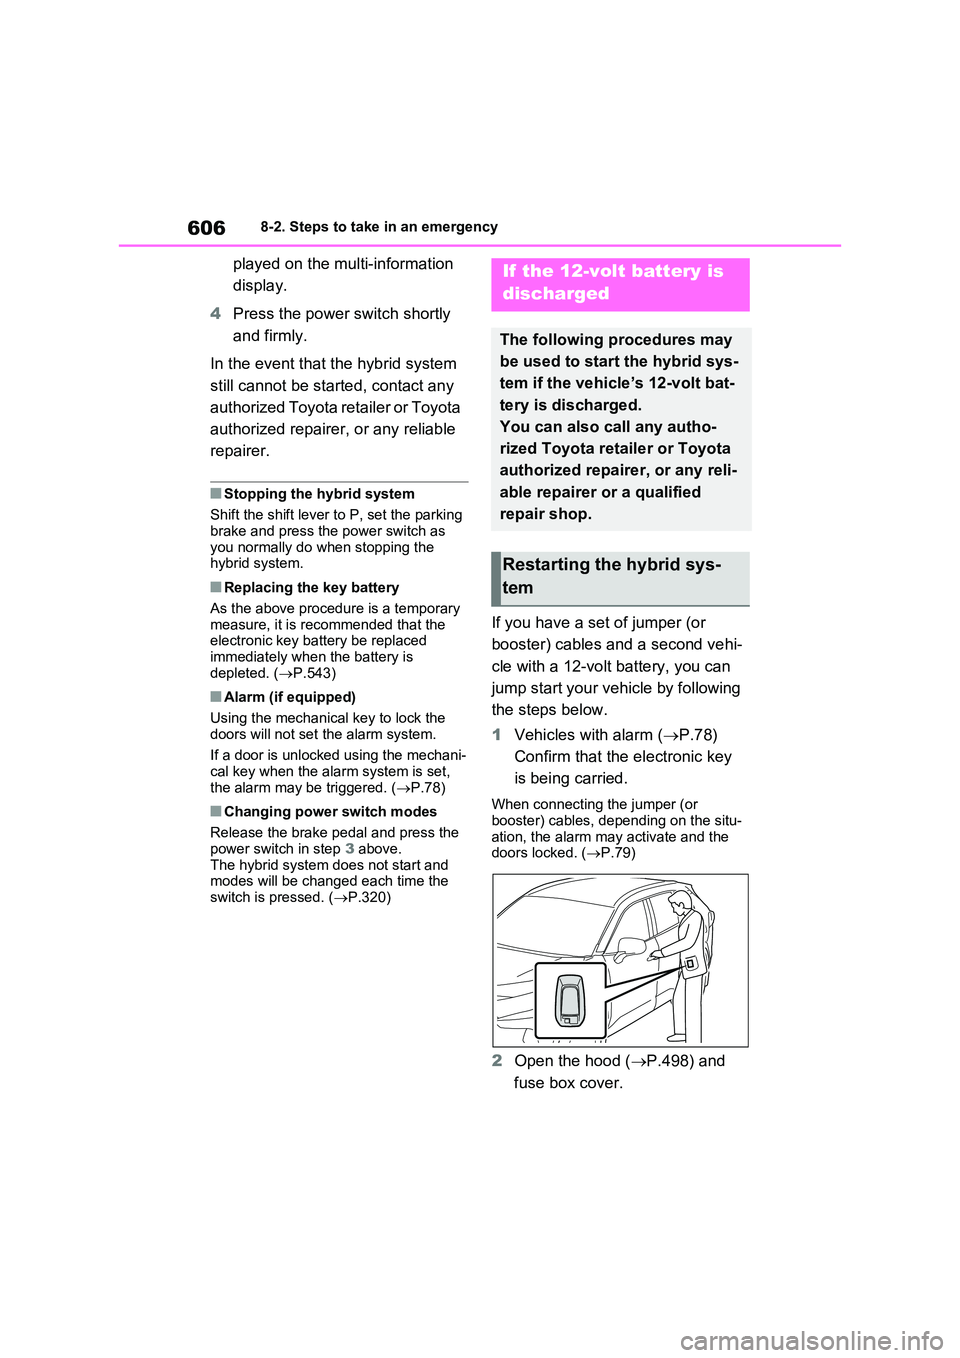 TOYOTA VERSO S 2011  Owners Manual 6068-2. Steps to take in an emergency
played on the multi-information  
display. 
4 Press the power switch shortly  
and firmly. 
In the event that the hybrid system  
still cannot be started, contact